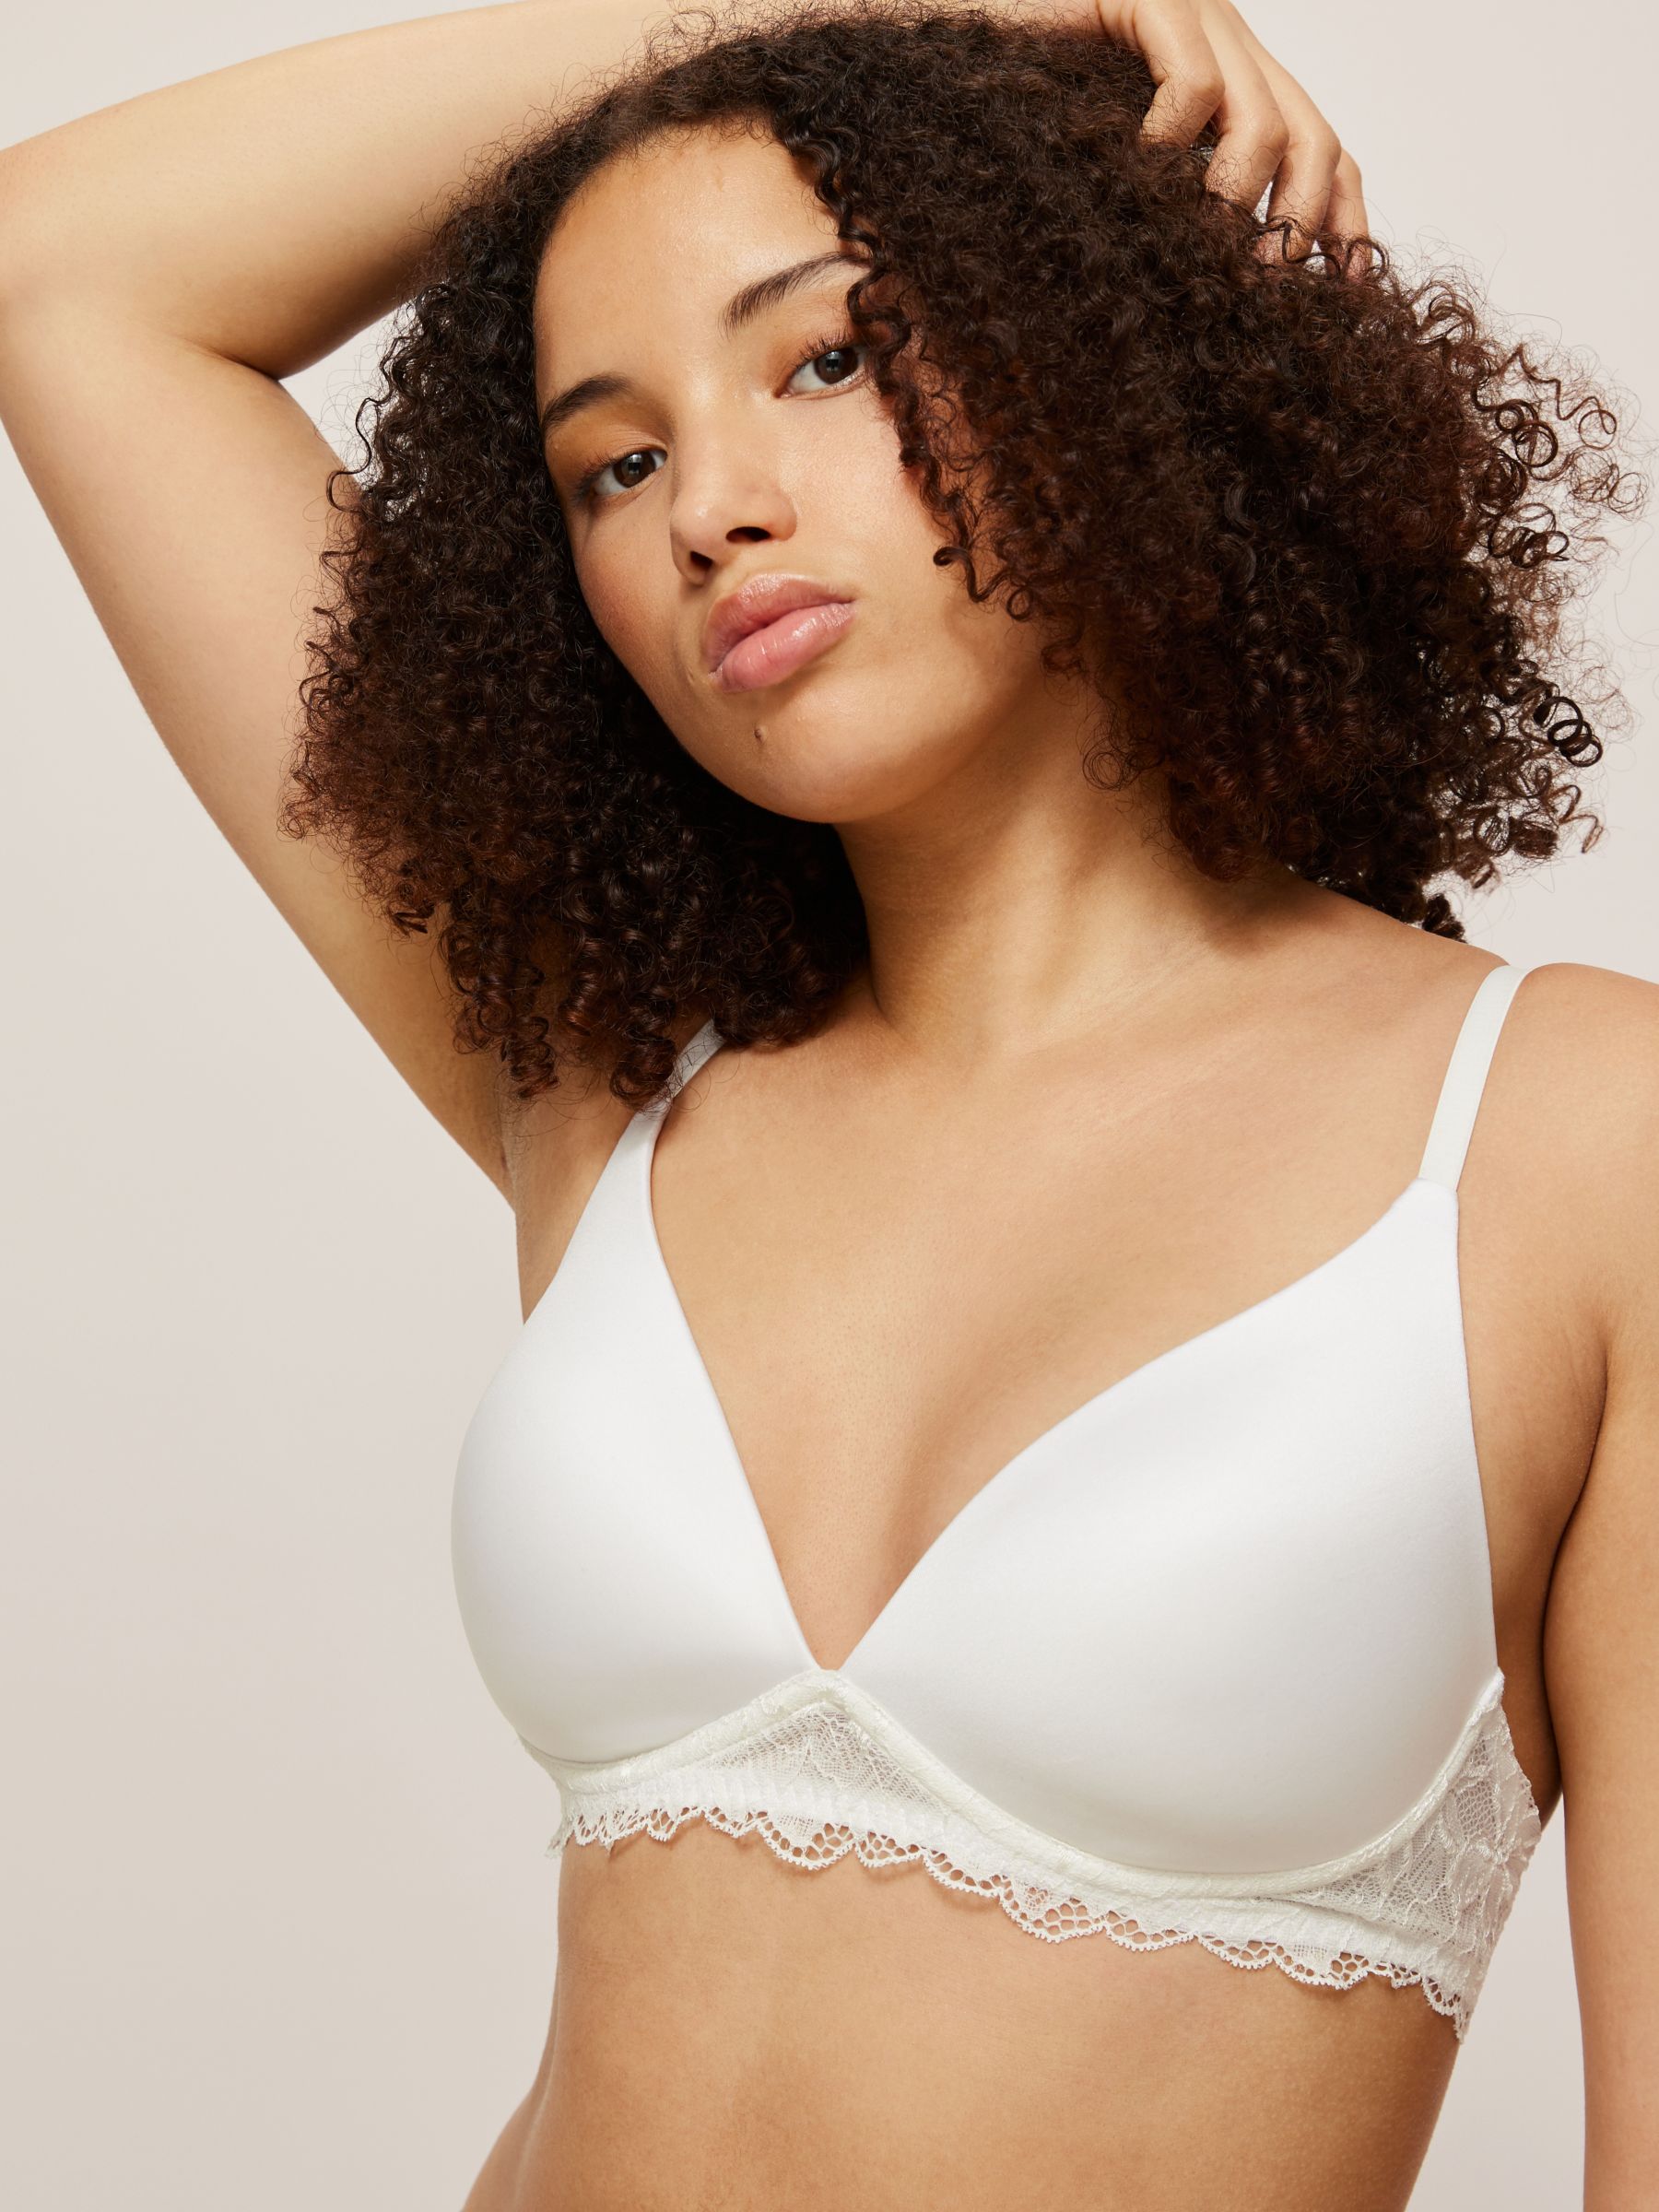 Simply Perfect by Warner's Women's Supersoft Lace Wirefree Bra - White 36C